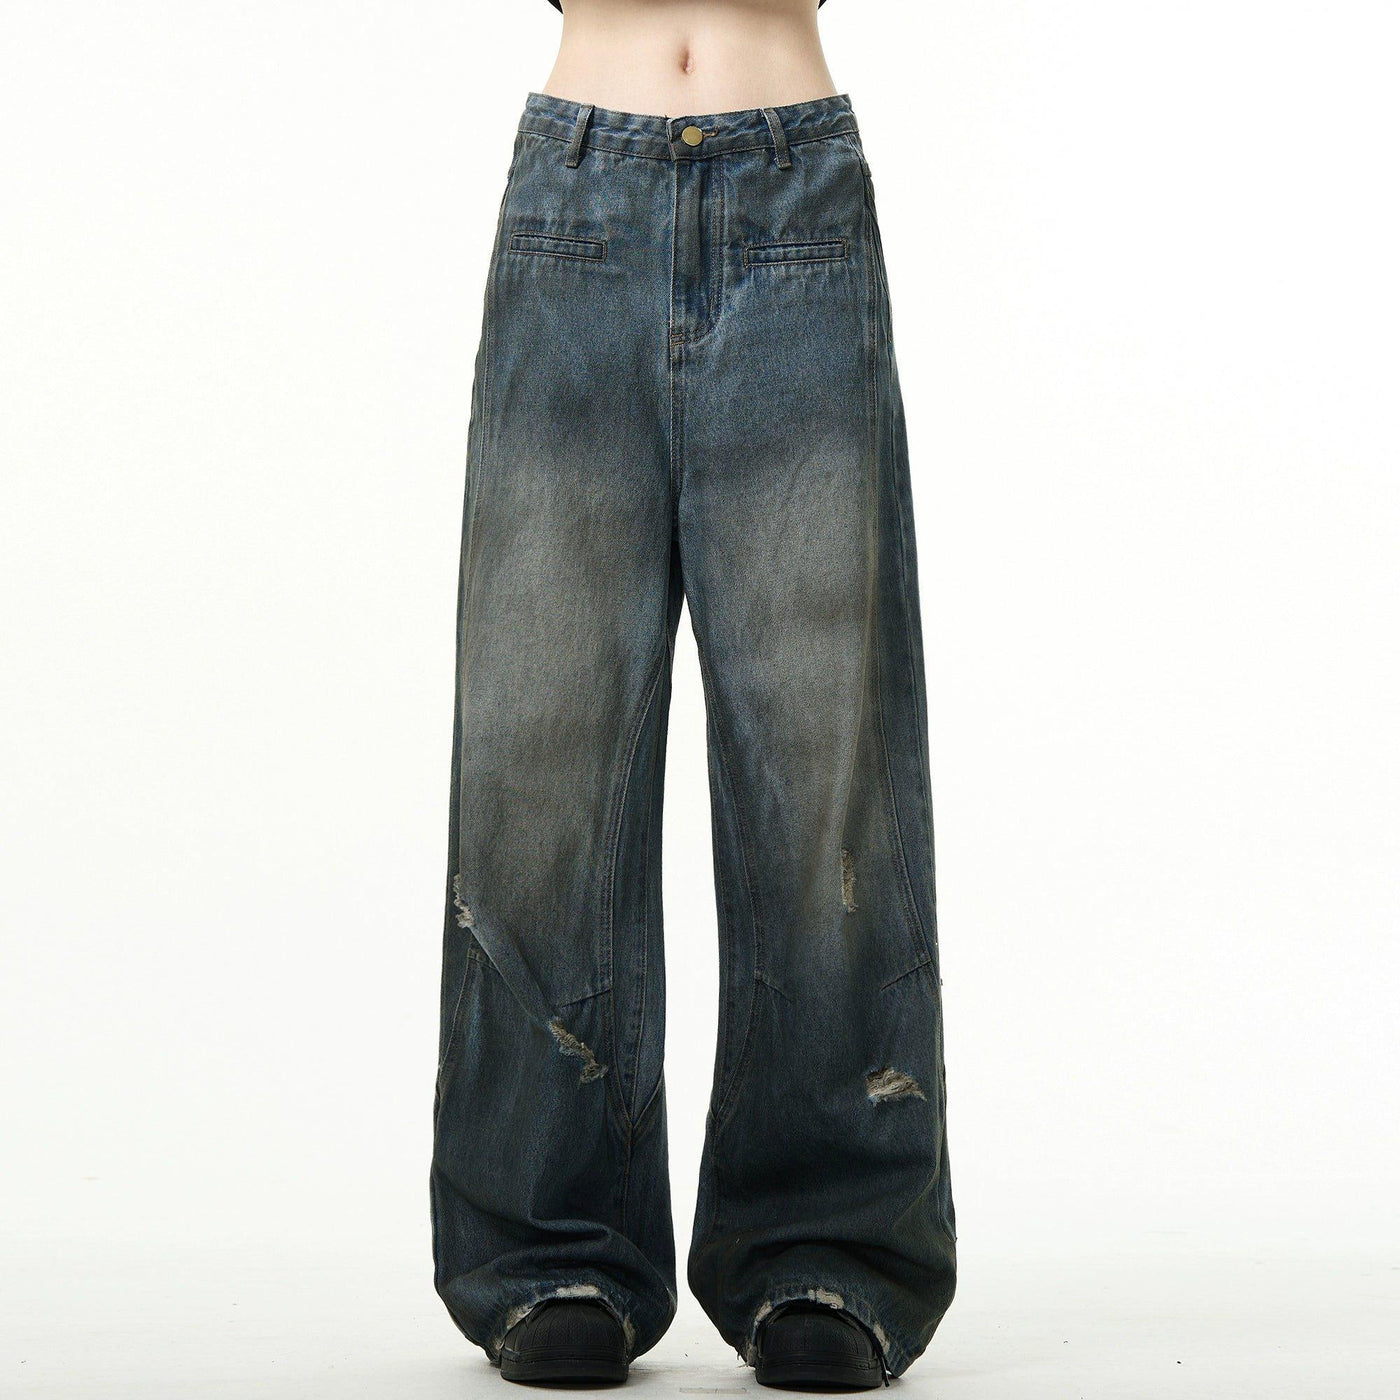 Distressed Spots Washed Jeans Korean Street Fashion Jeans By Mad Witch Shop Online at OH Vault